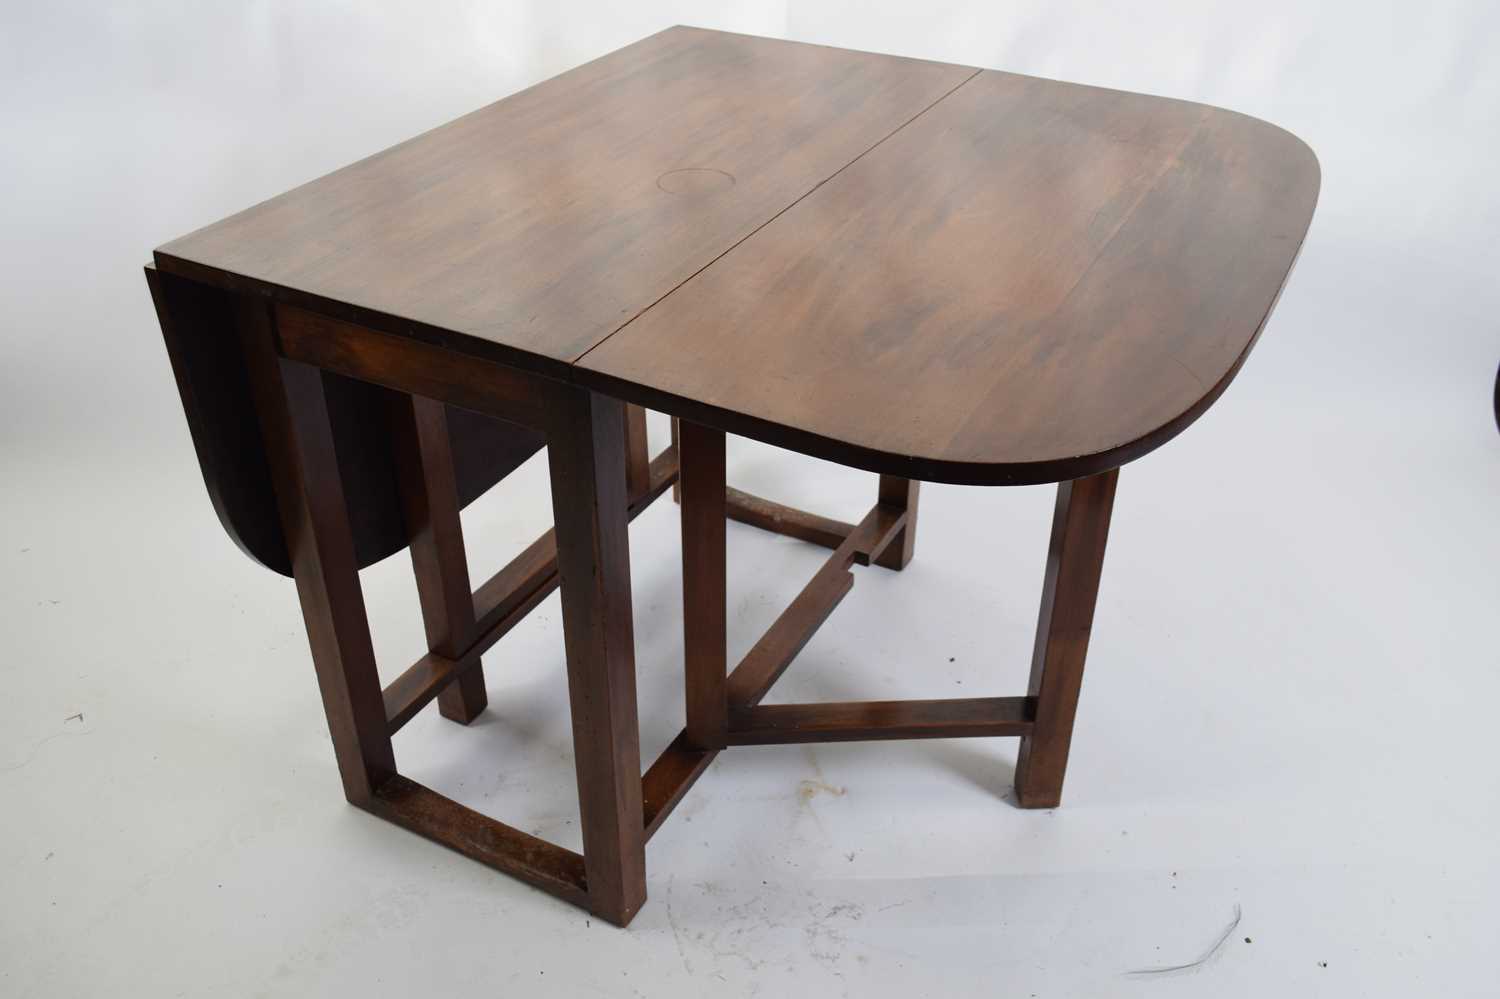 20th century mahogany drop leaf dining table, 91cm wide - Image 3 of 3